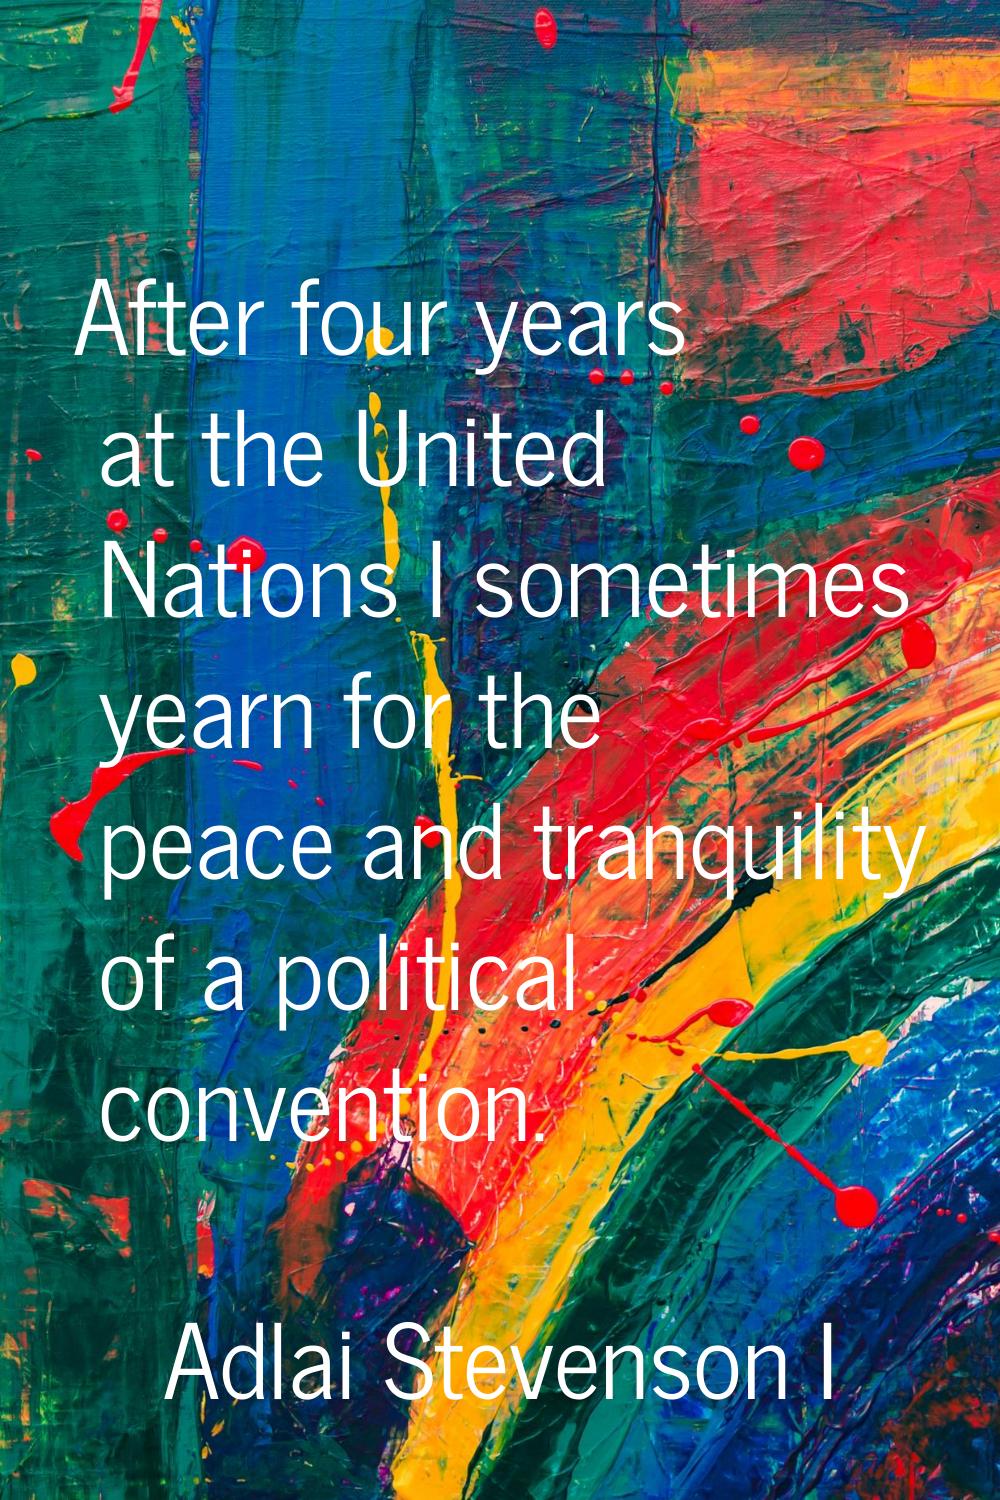 After four years at the United Nations I sometimes yearn for the peace and tranquility of a politic